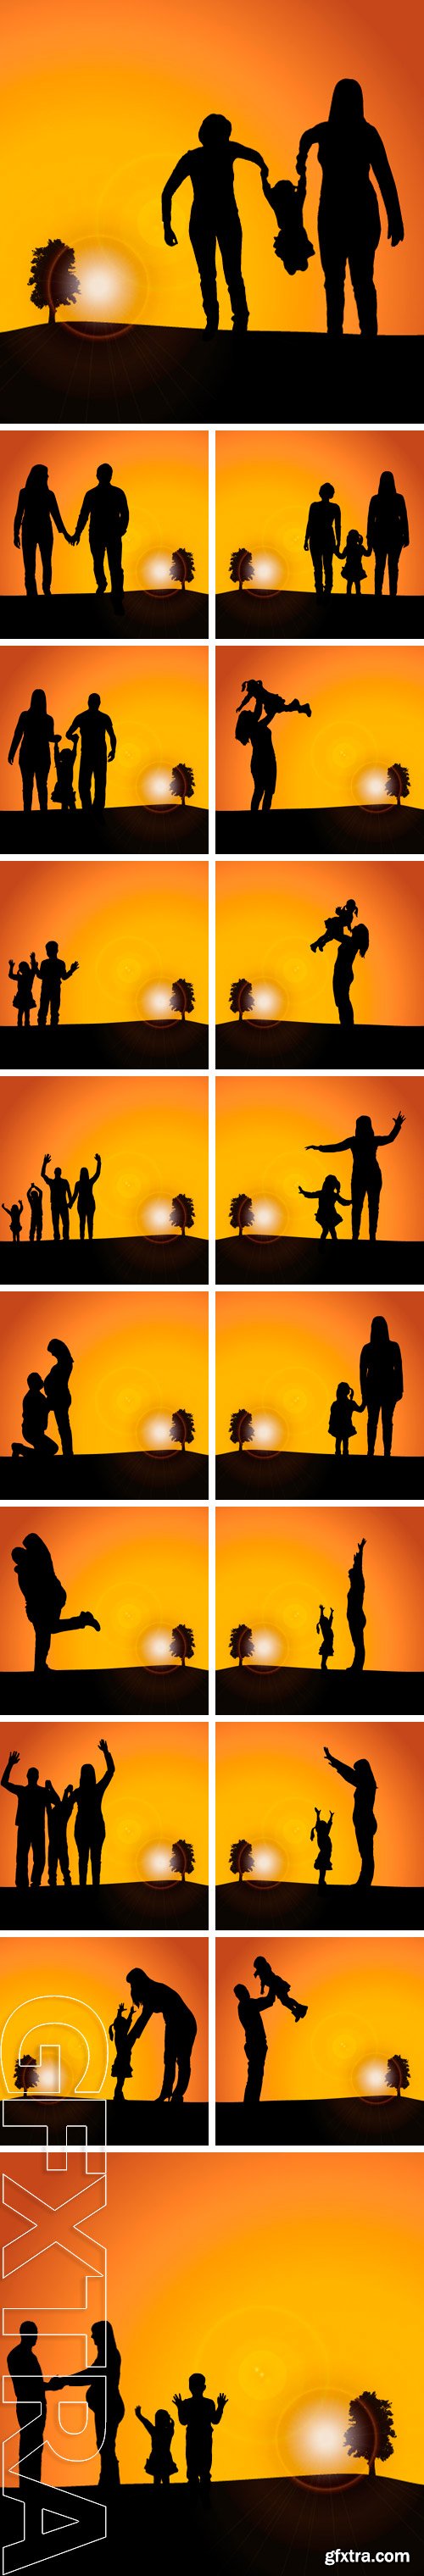 Stock Vectors - Vector silhouette nature at sunset with people